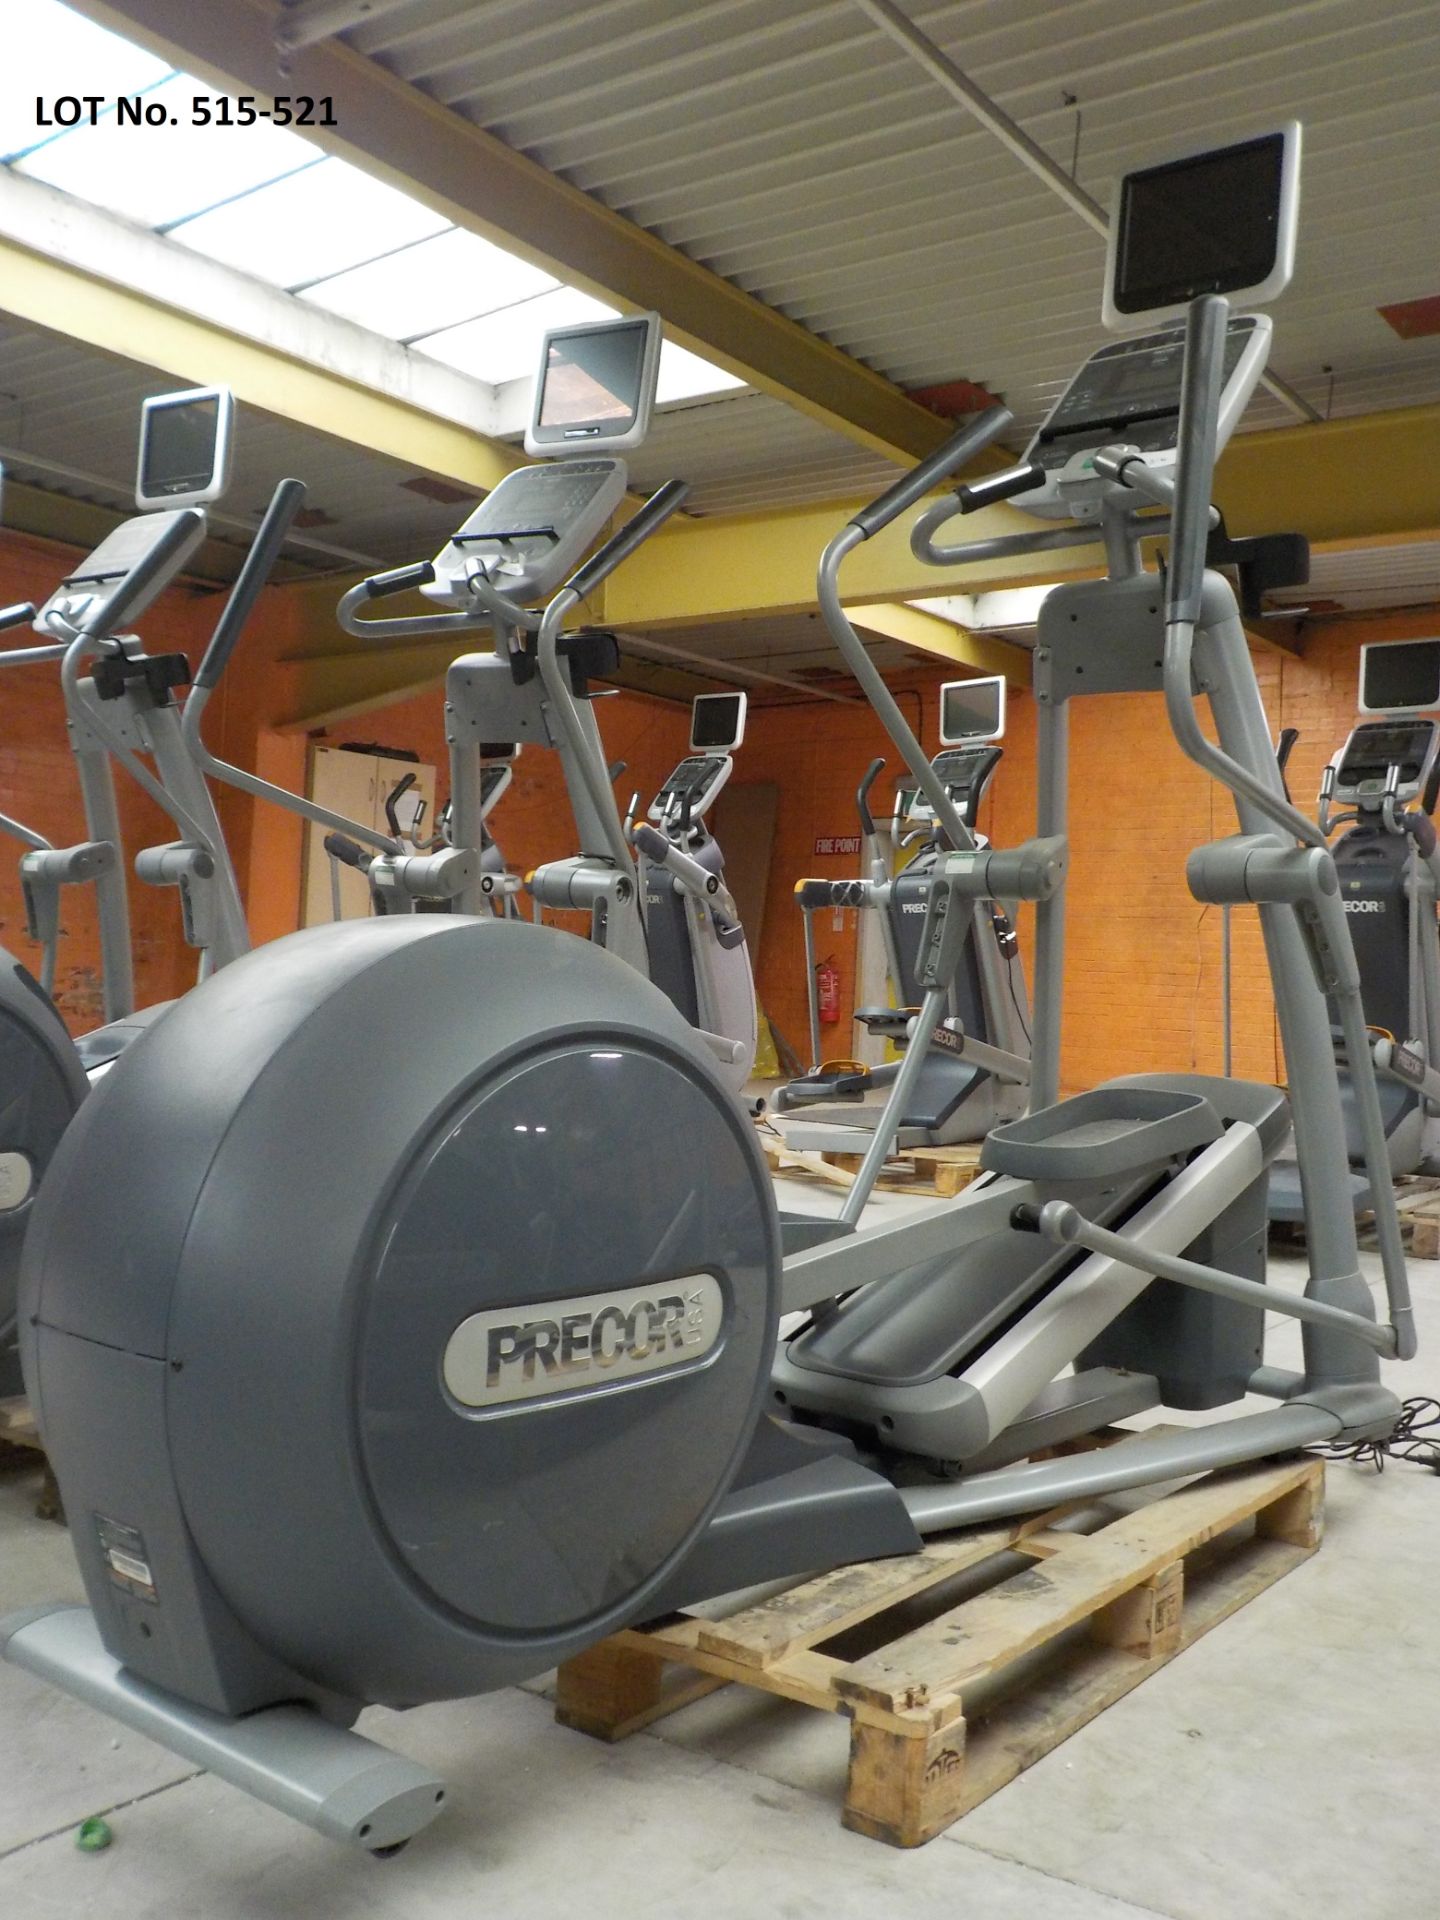 PRECOR ELLIPTICAL - EFX576i (WITH TV) serial number AXGEI09090001 *PLEASE NOTE - this lot is to be